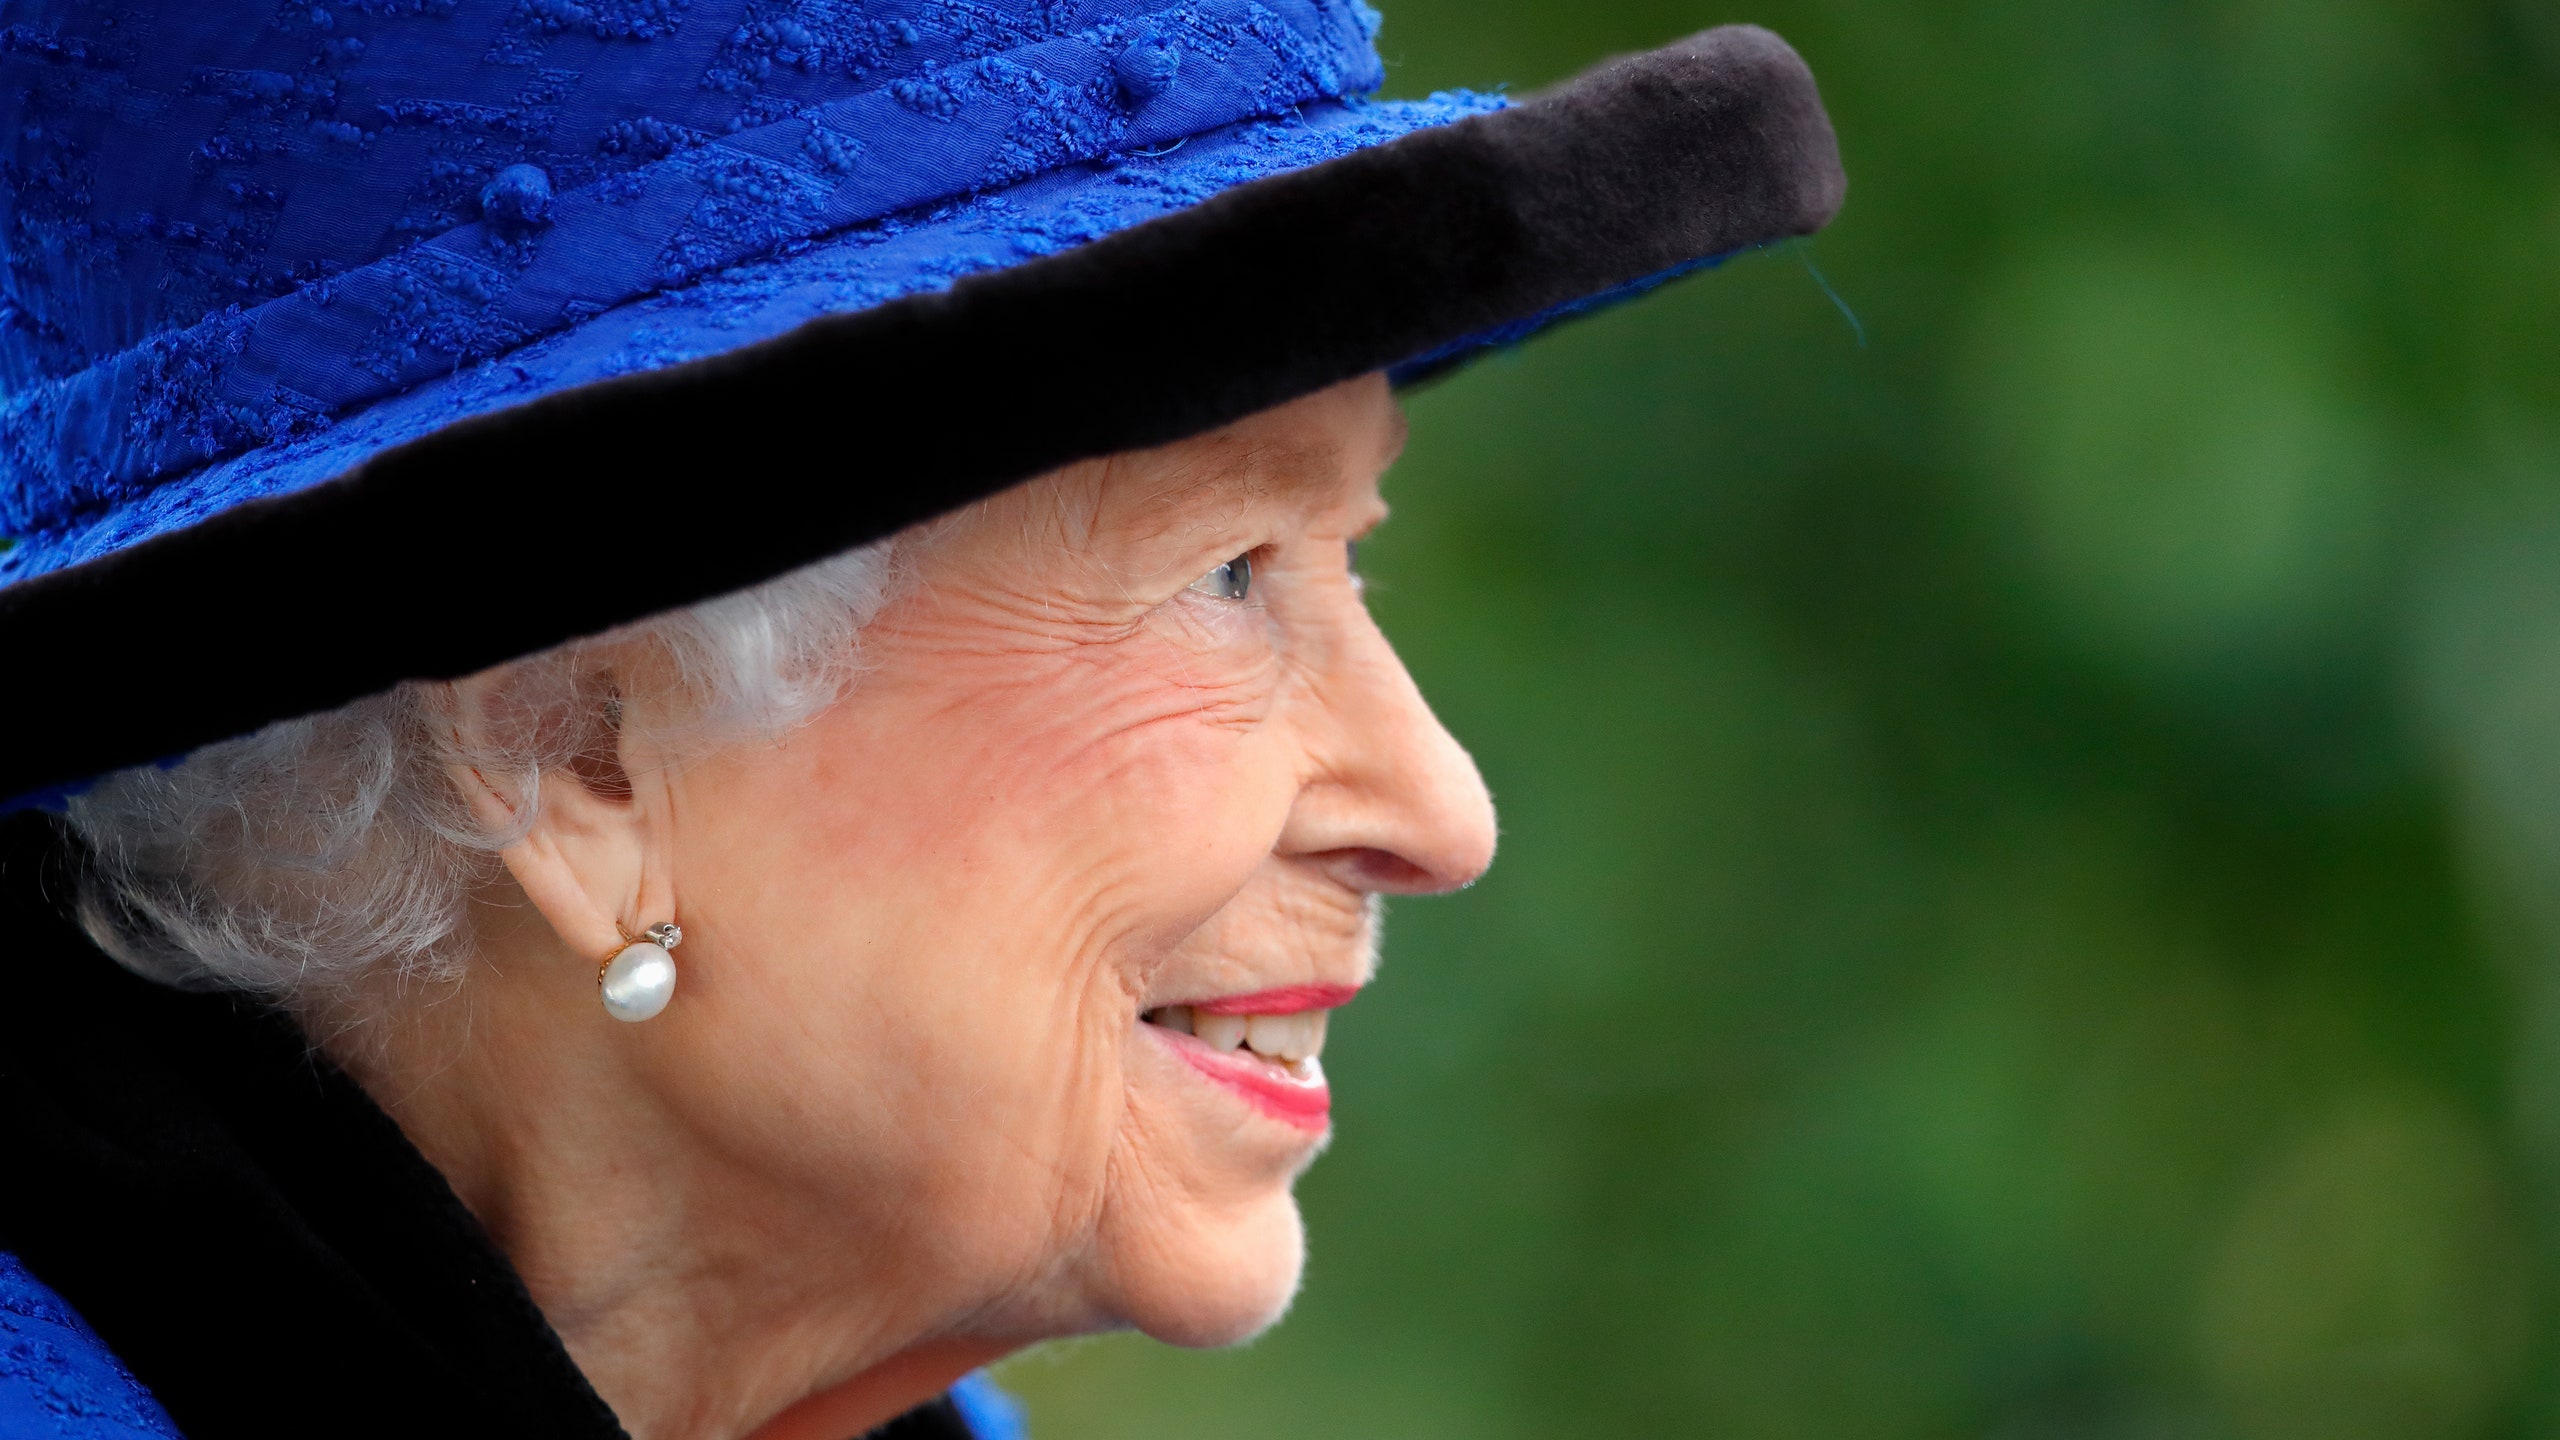 Platinum Jubilee: A Guide to the Celebrations of Queen Elizabeth II's 70 Years on the Throne